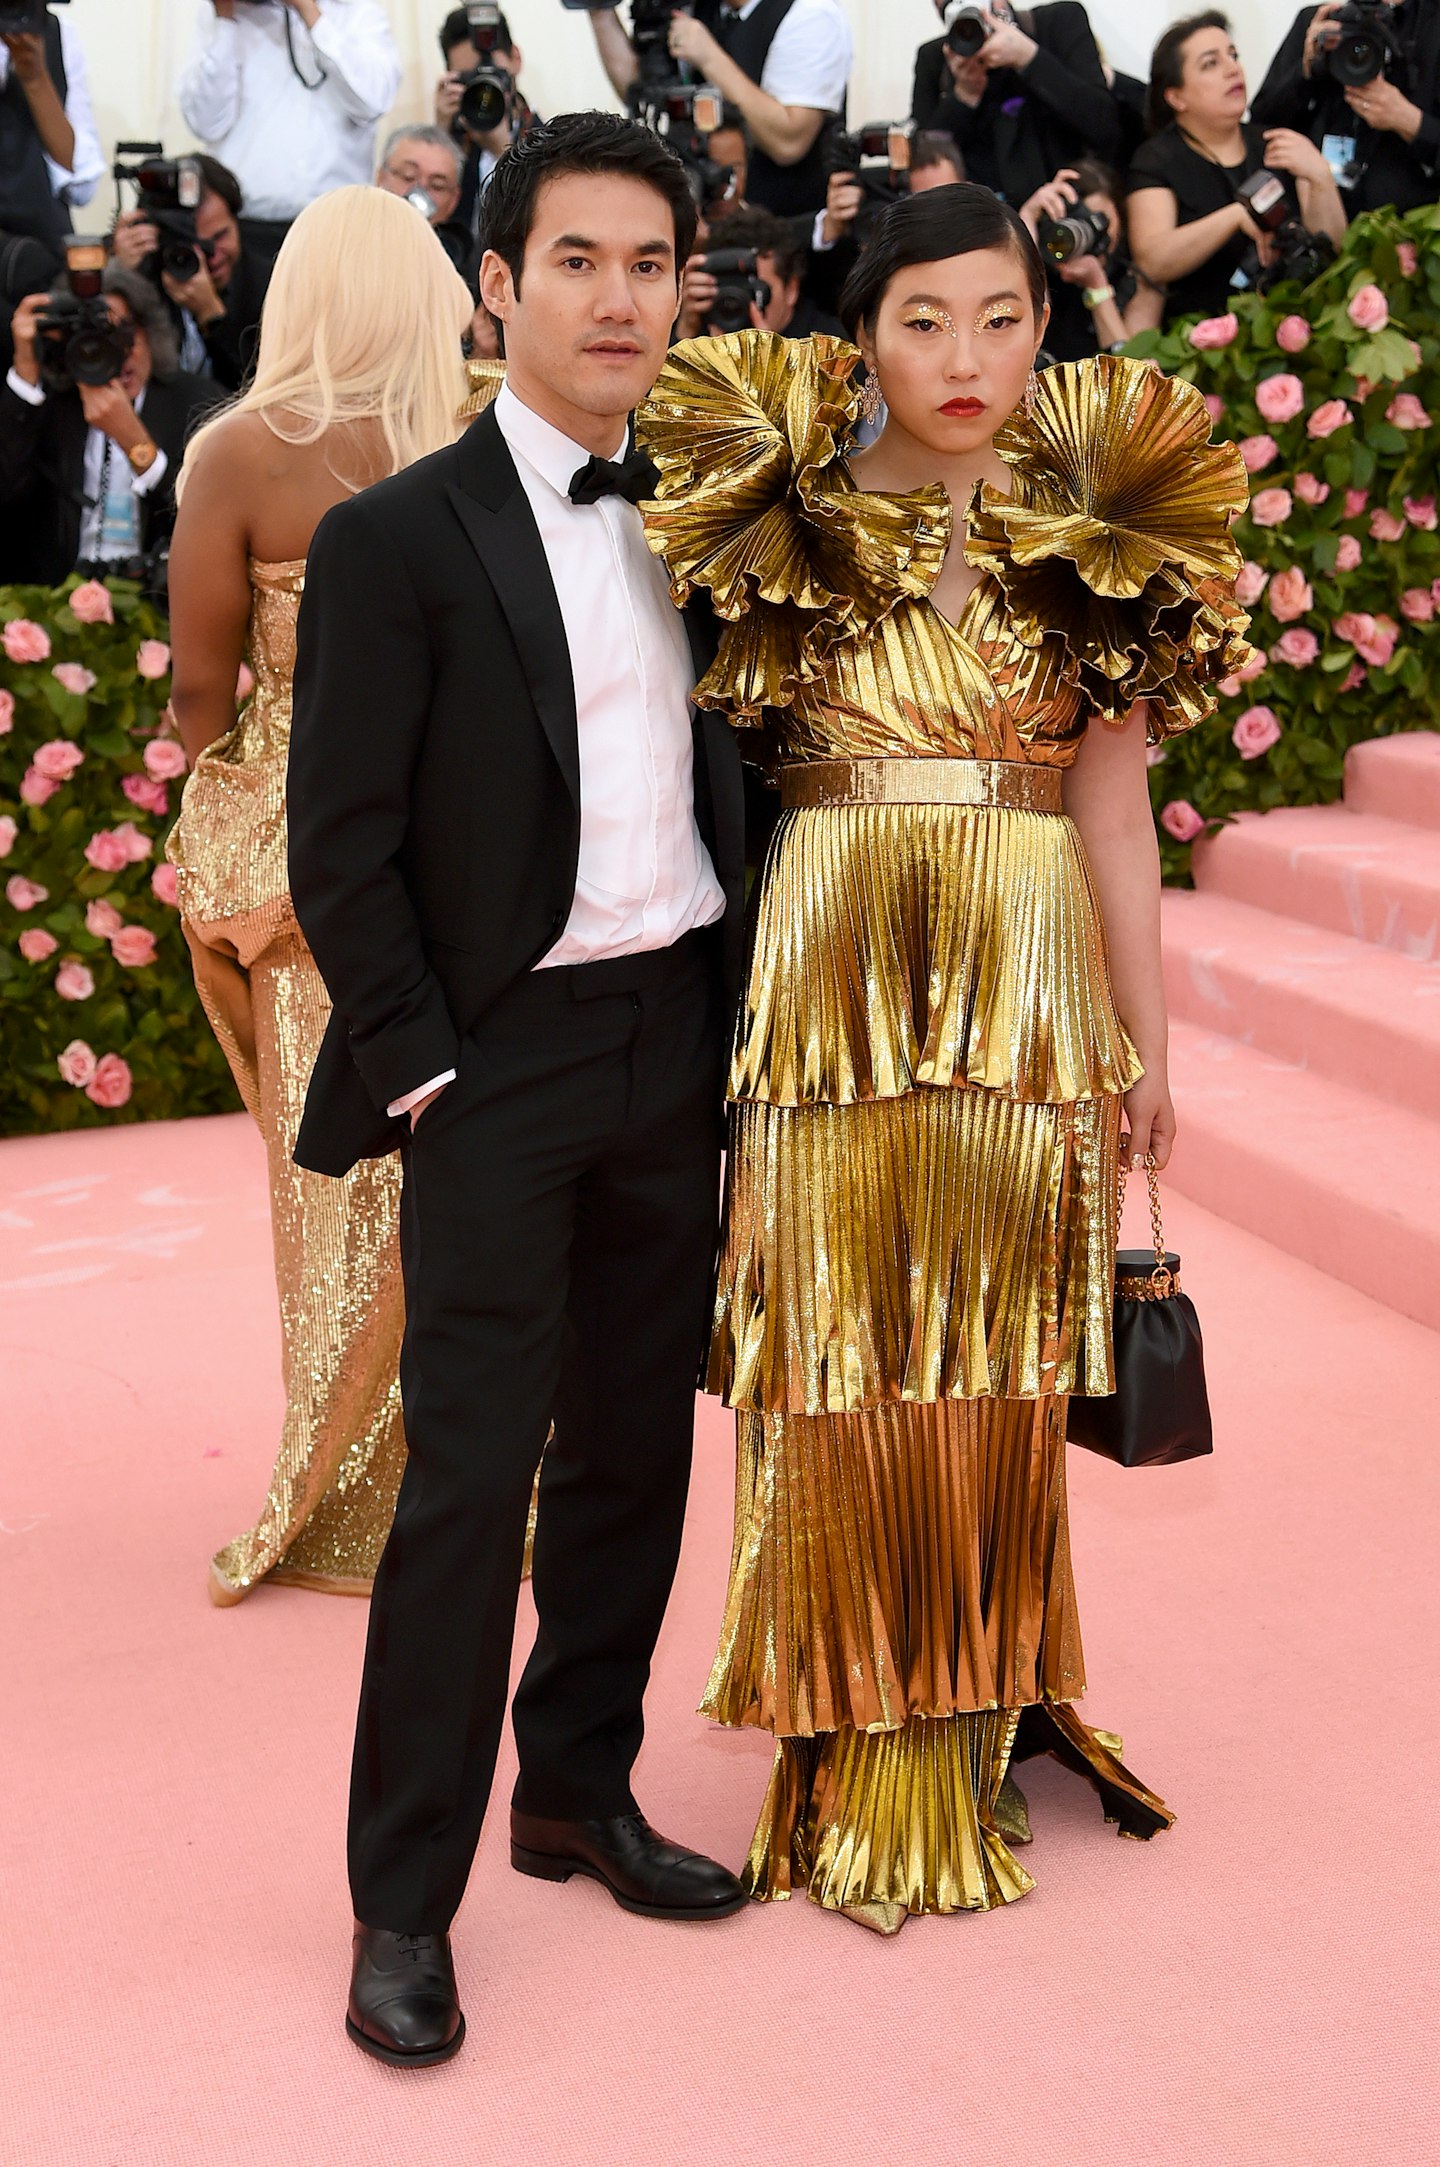 Designer Joseph Altuzarra was accompanied by Awkwafina, who wore a gold dress of his design